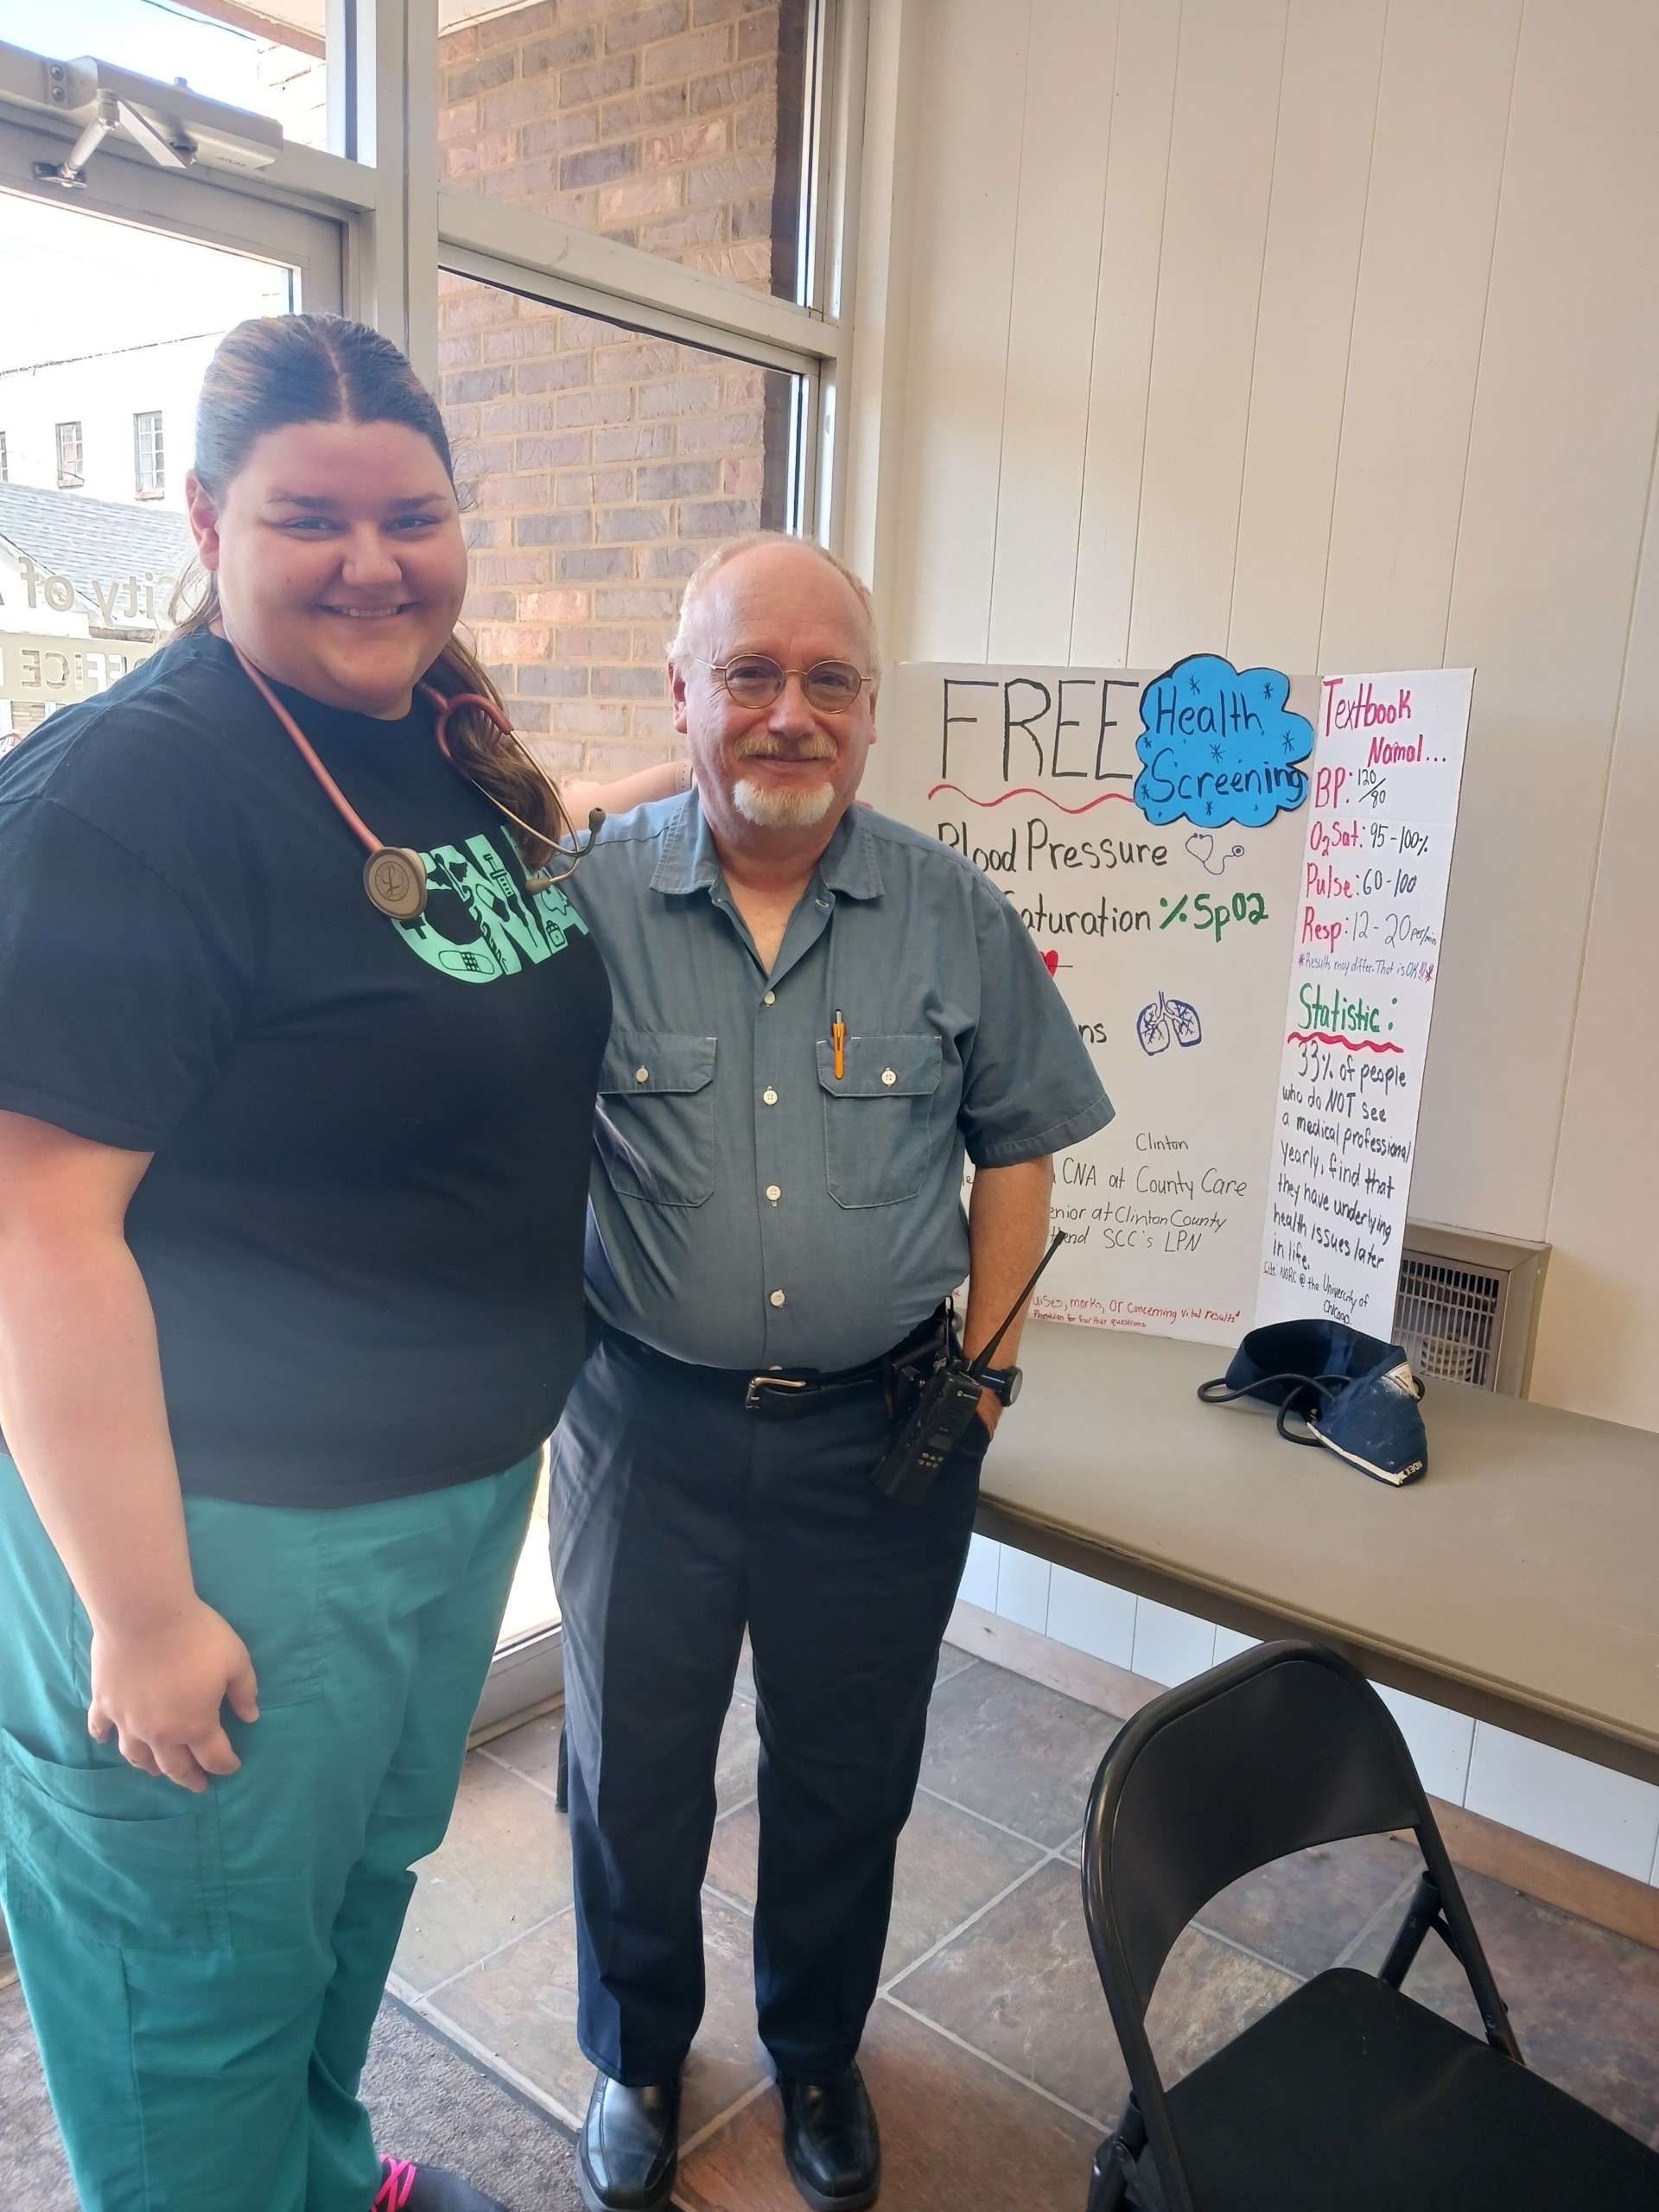 Student Alex Beasley serves the former mayor of Albany, Steve Lawson as part of her community project to provide free health screenings using her CNA skills